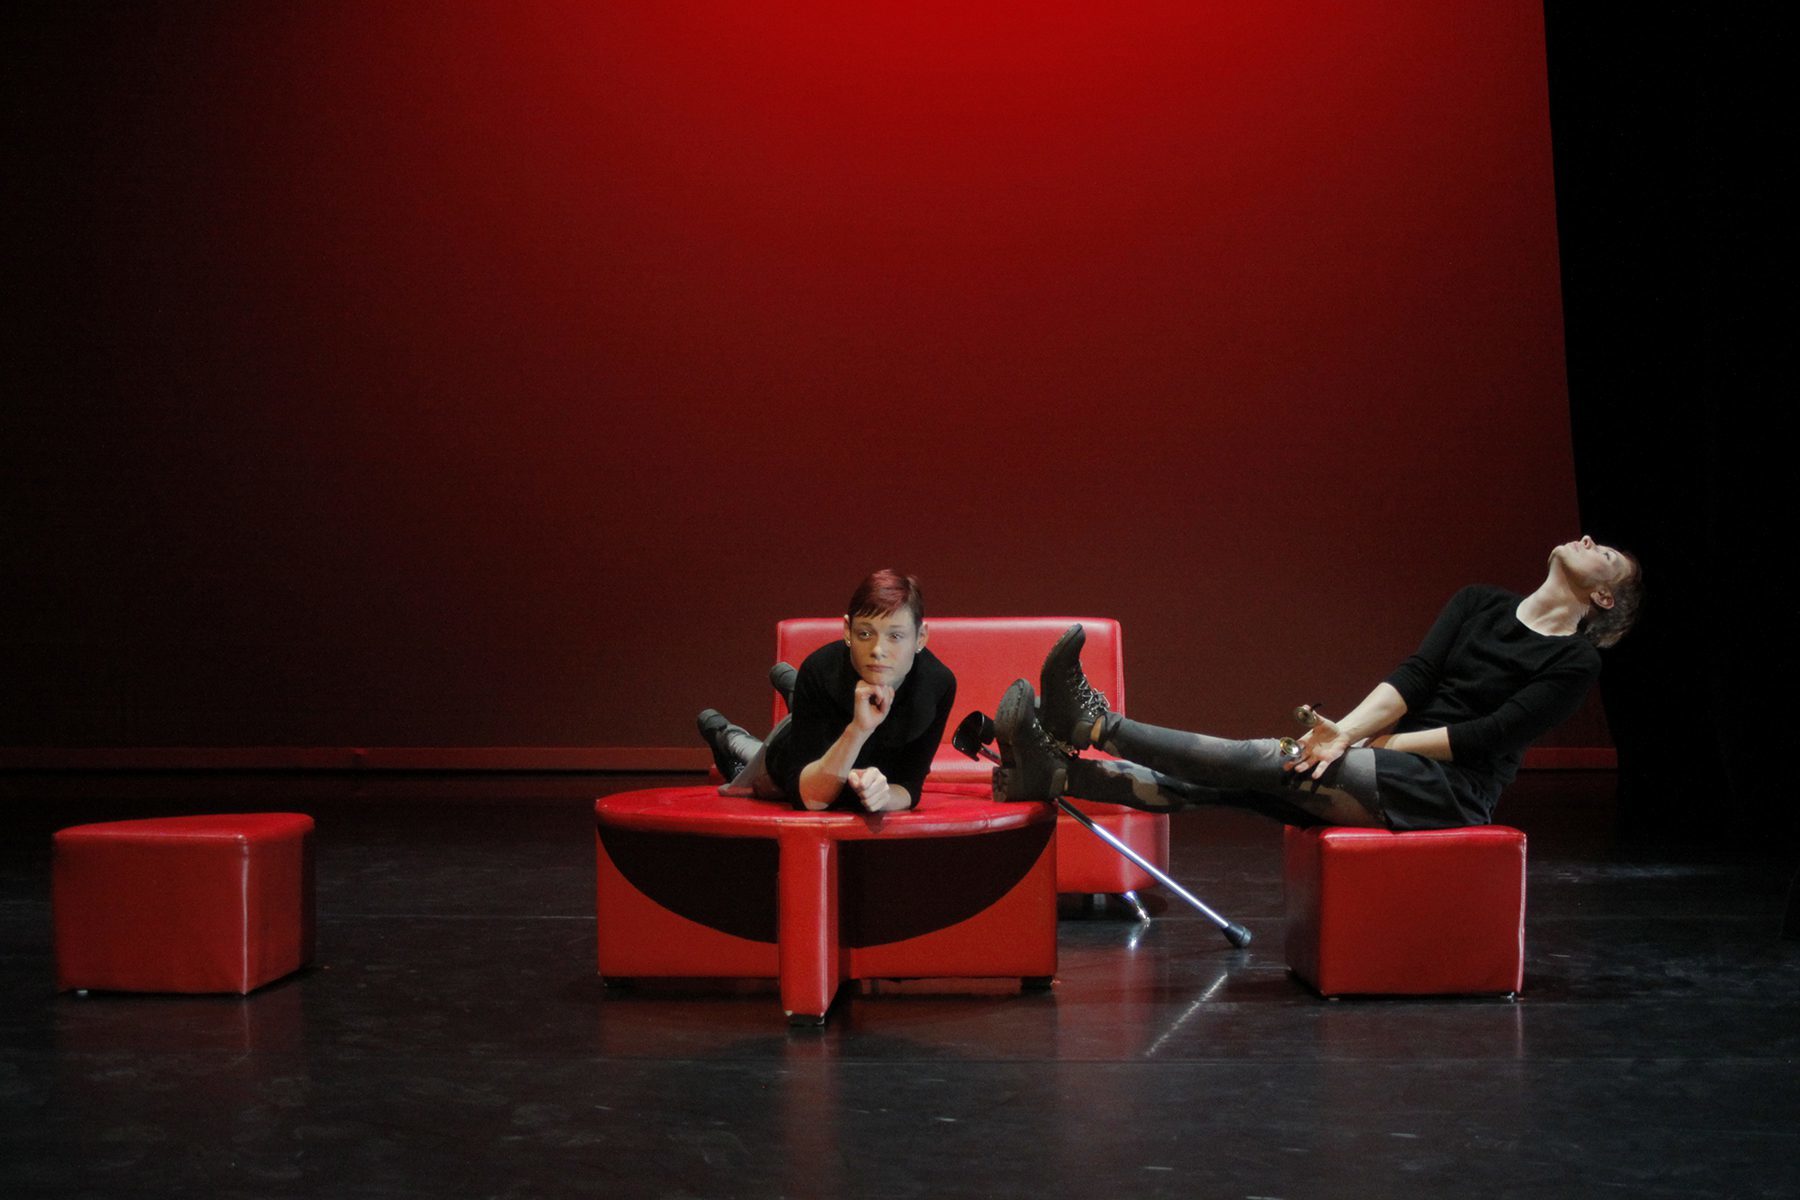 two dancers with and without disabilities perform on stage with red furniture.